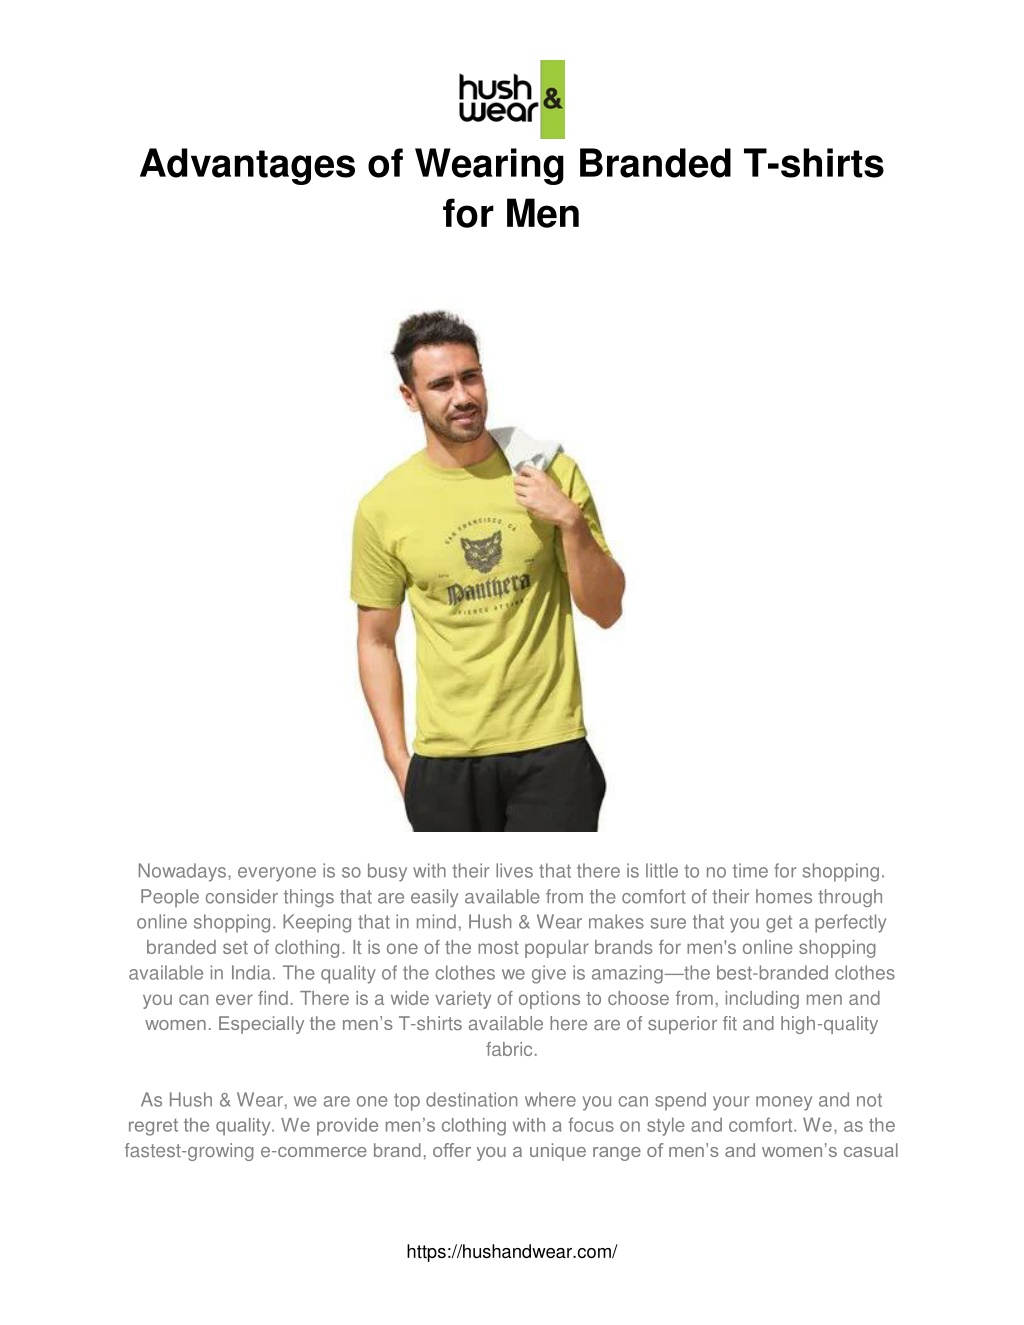 Ppt Advantages Of Wearing Branded T Shirts For Men Powerpoint Presentation Id12323843